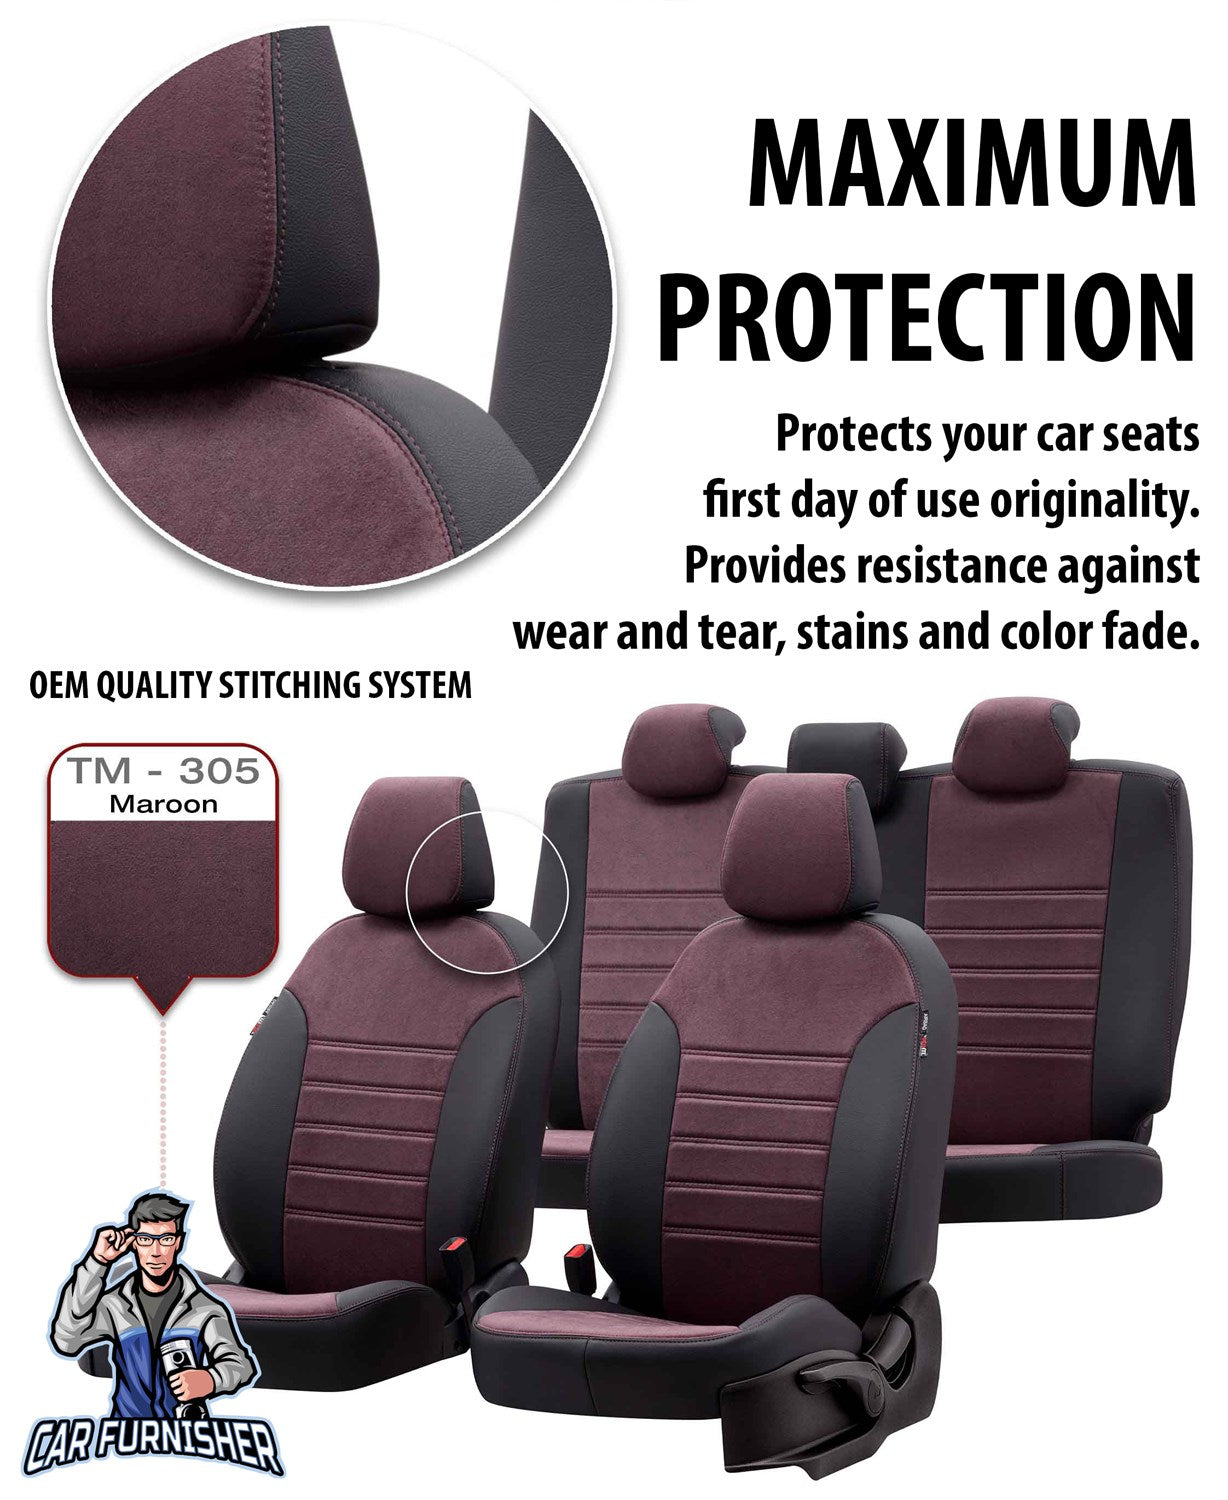 Peugeot 107 Seat Covers Milano Suede Design Burgundy Leather & Suede Fabric